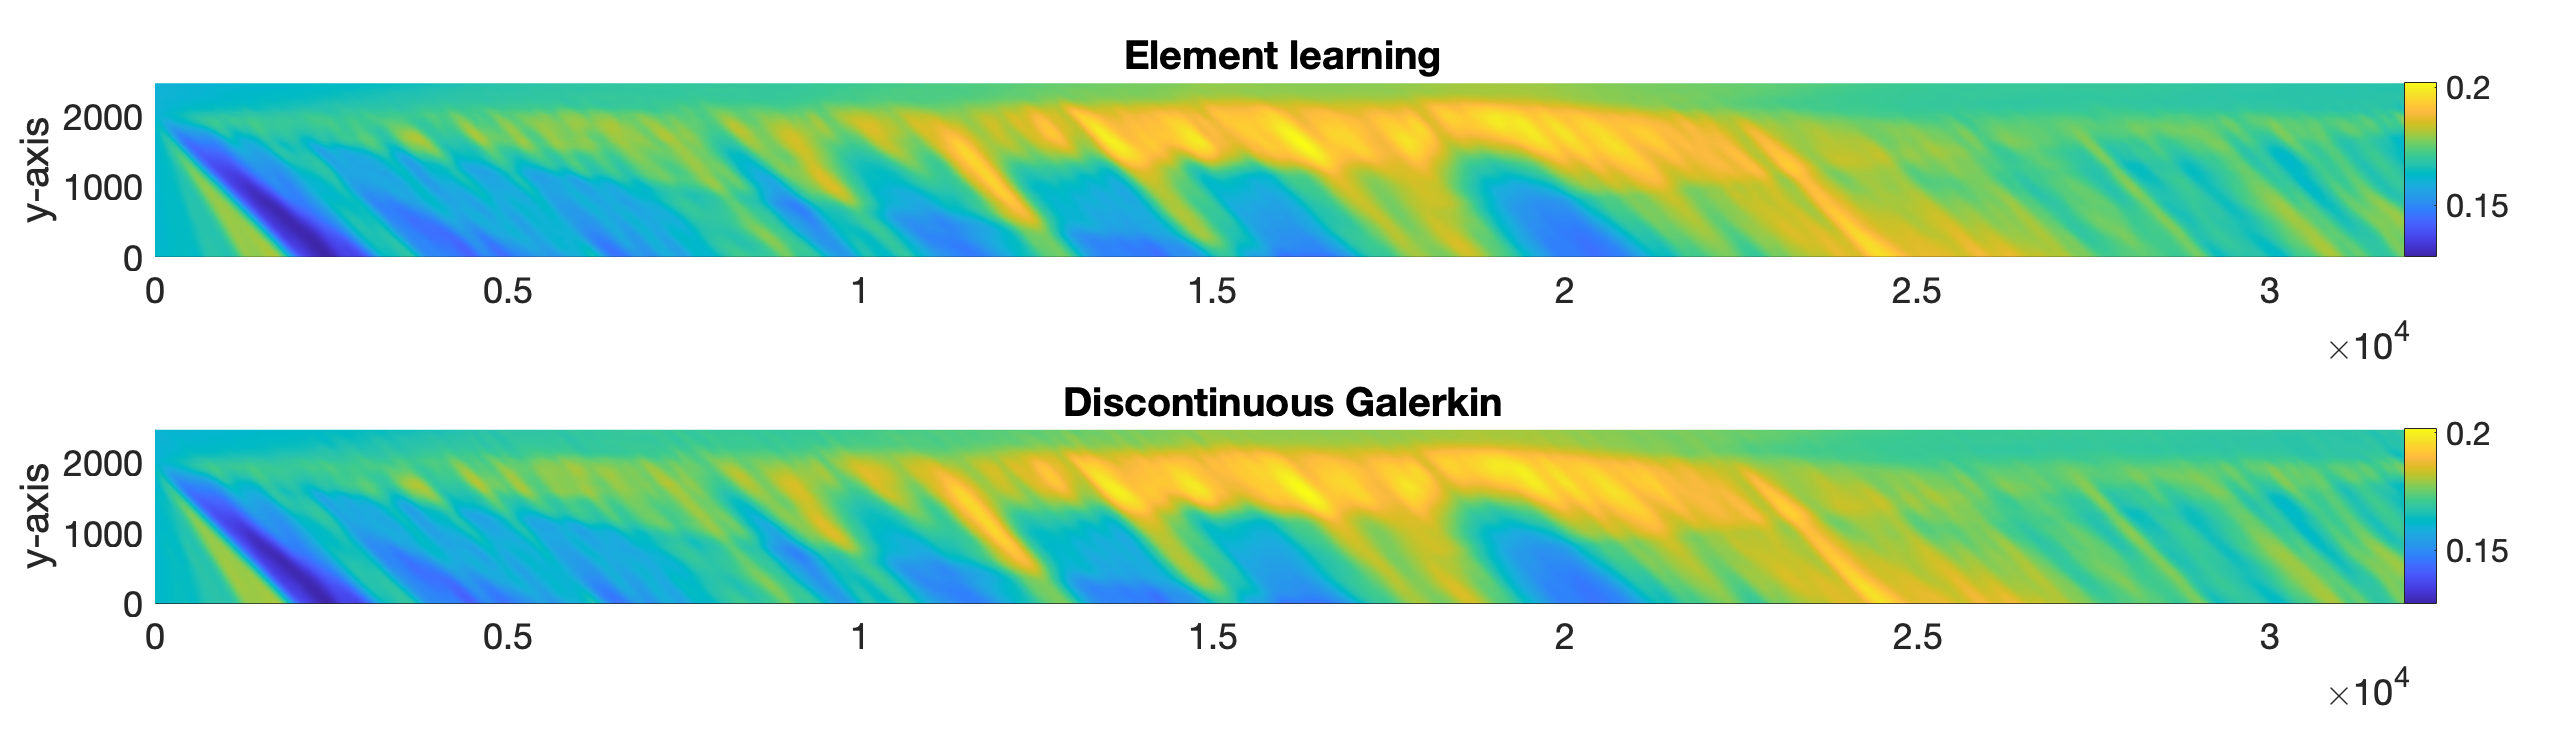 Element learning - results